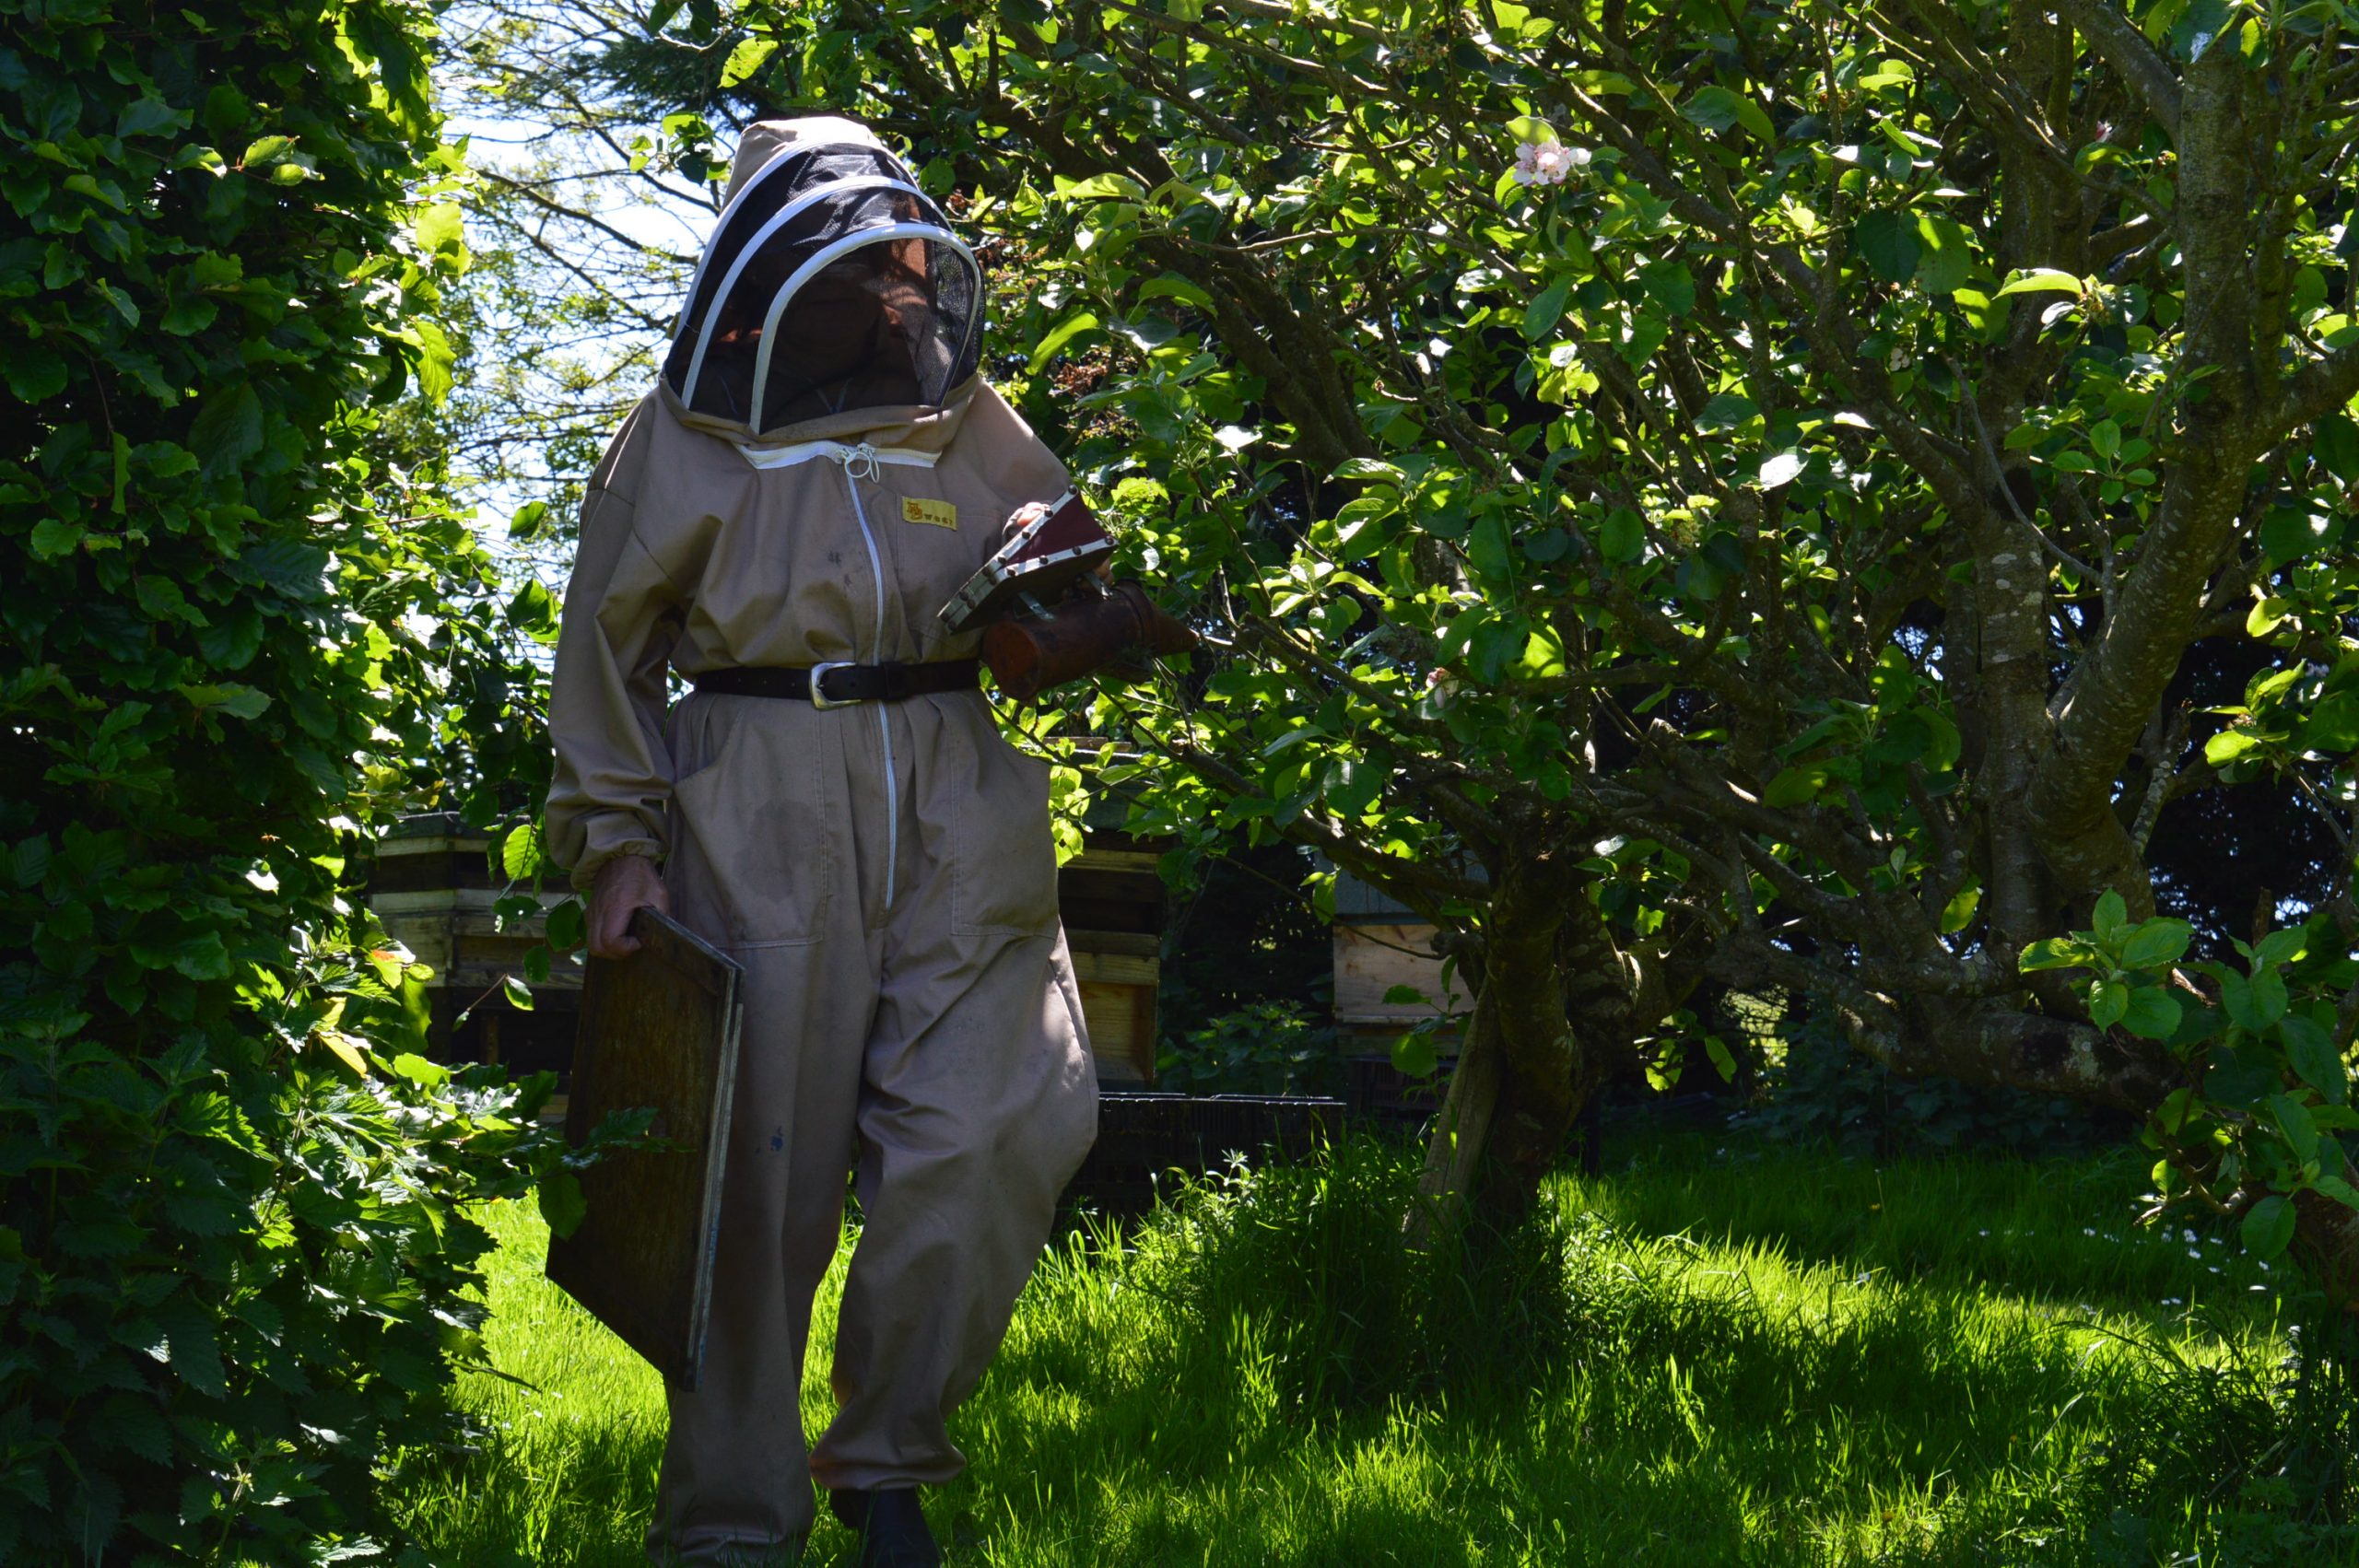 Beekeeper and found of Trish's Honey Products at work in the Apiary in Dunhill County Waterford